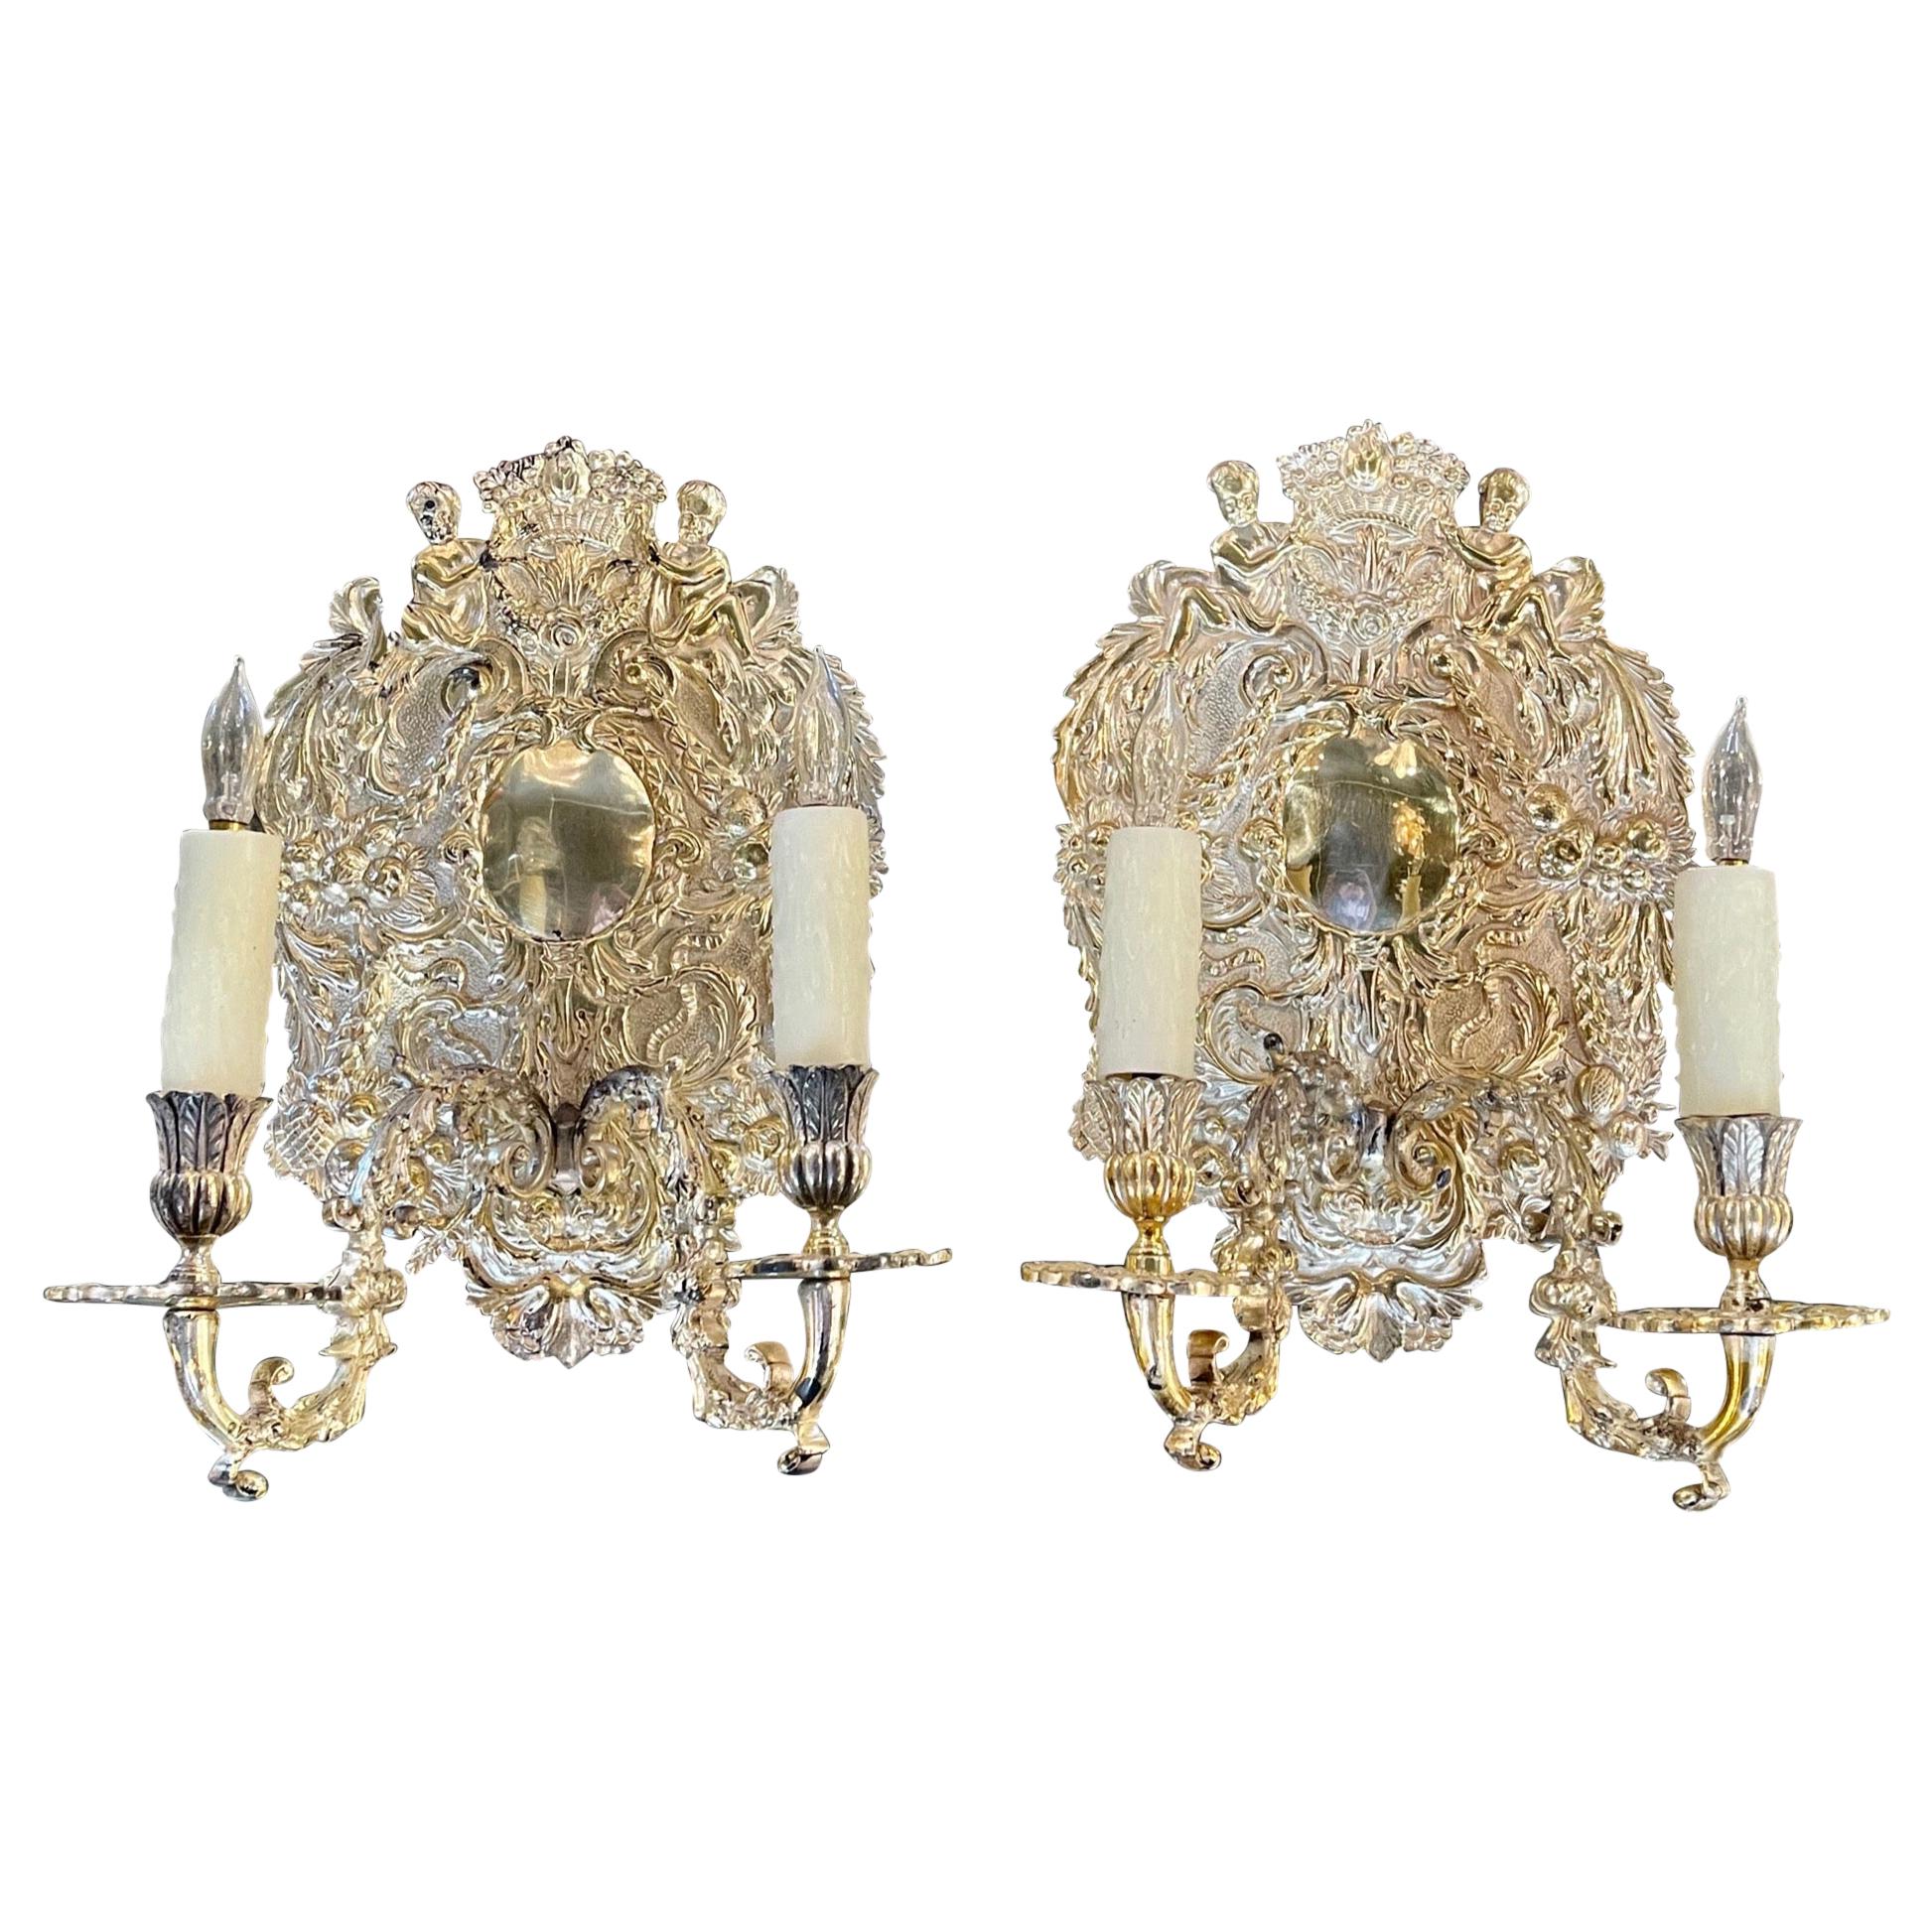 Pair of 19th Century English Silver Plate over Bronze 2 Light Sconces